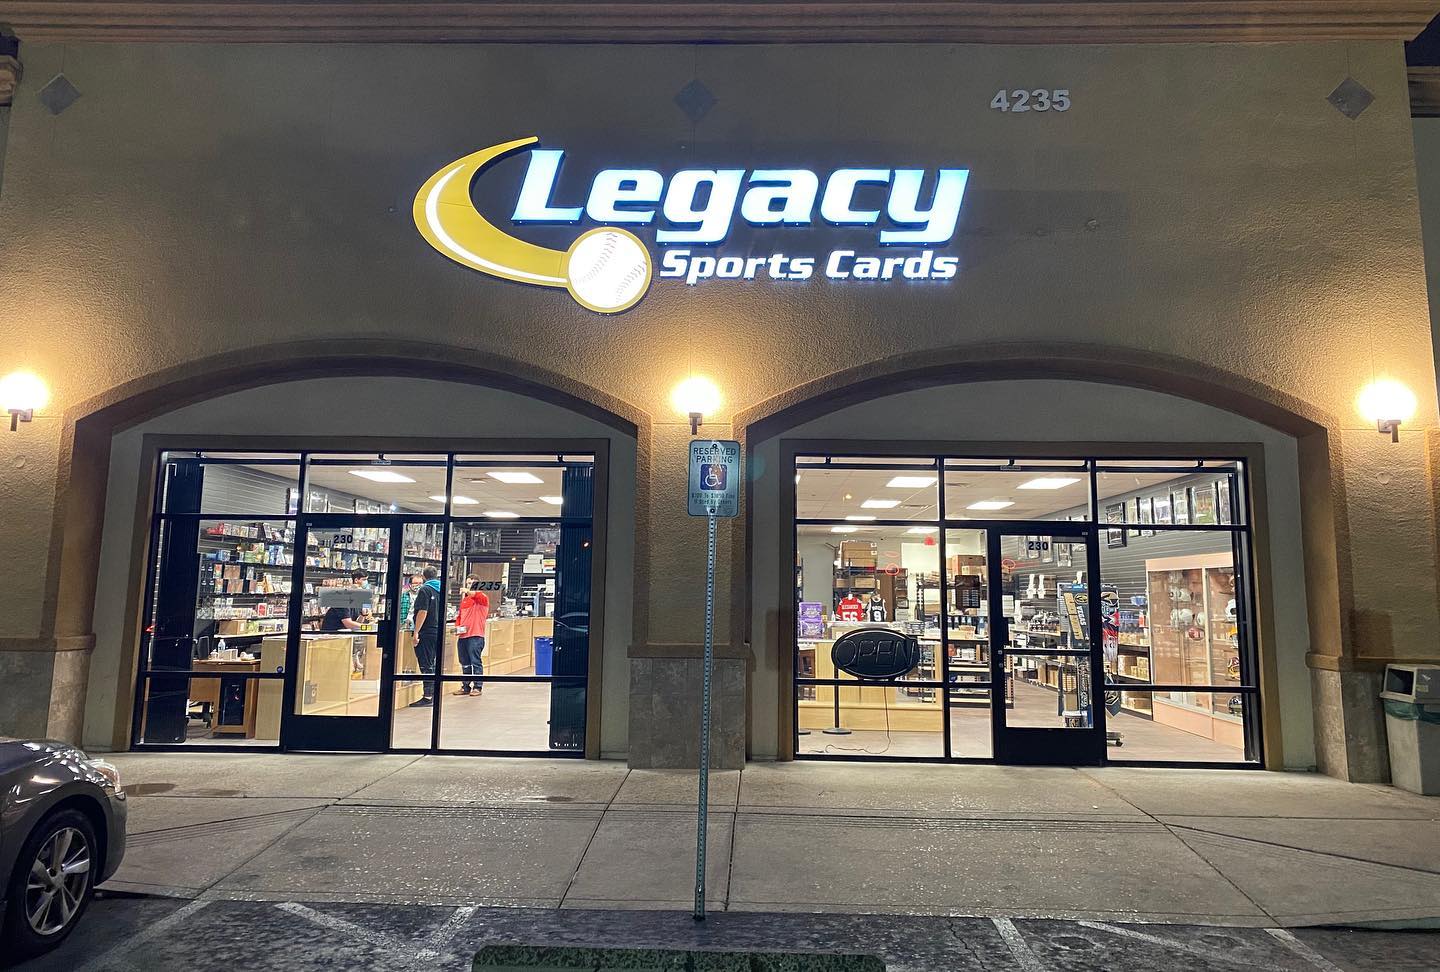 Legacy Sports Cards